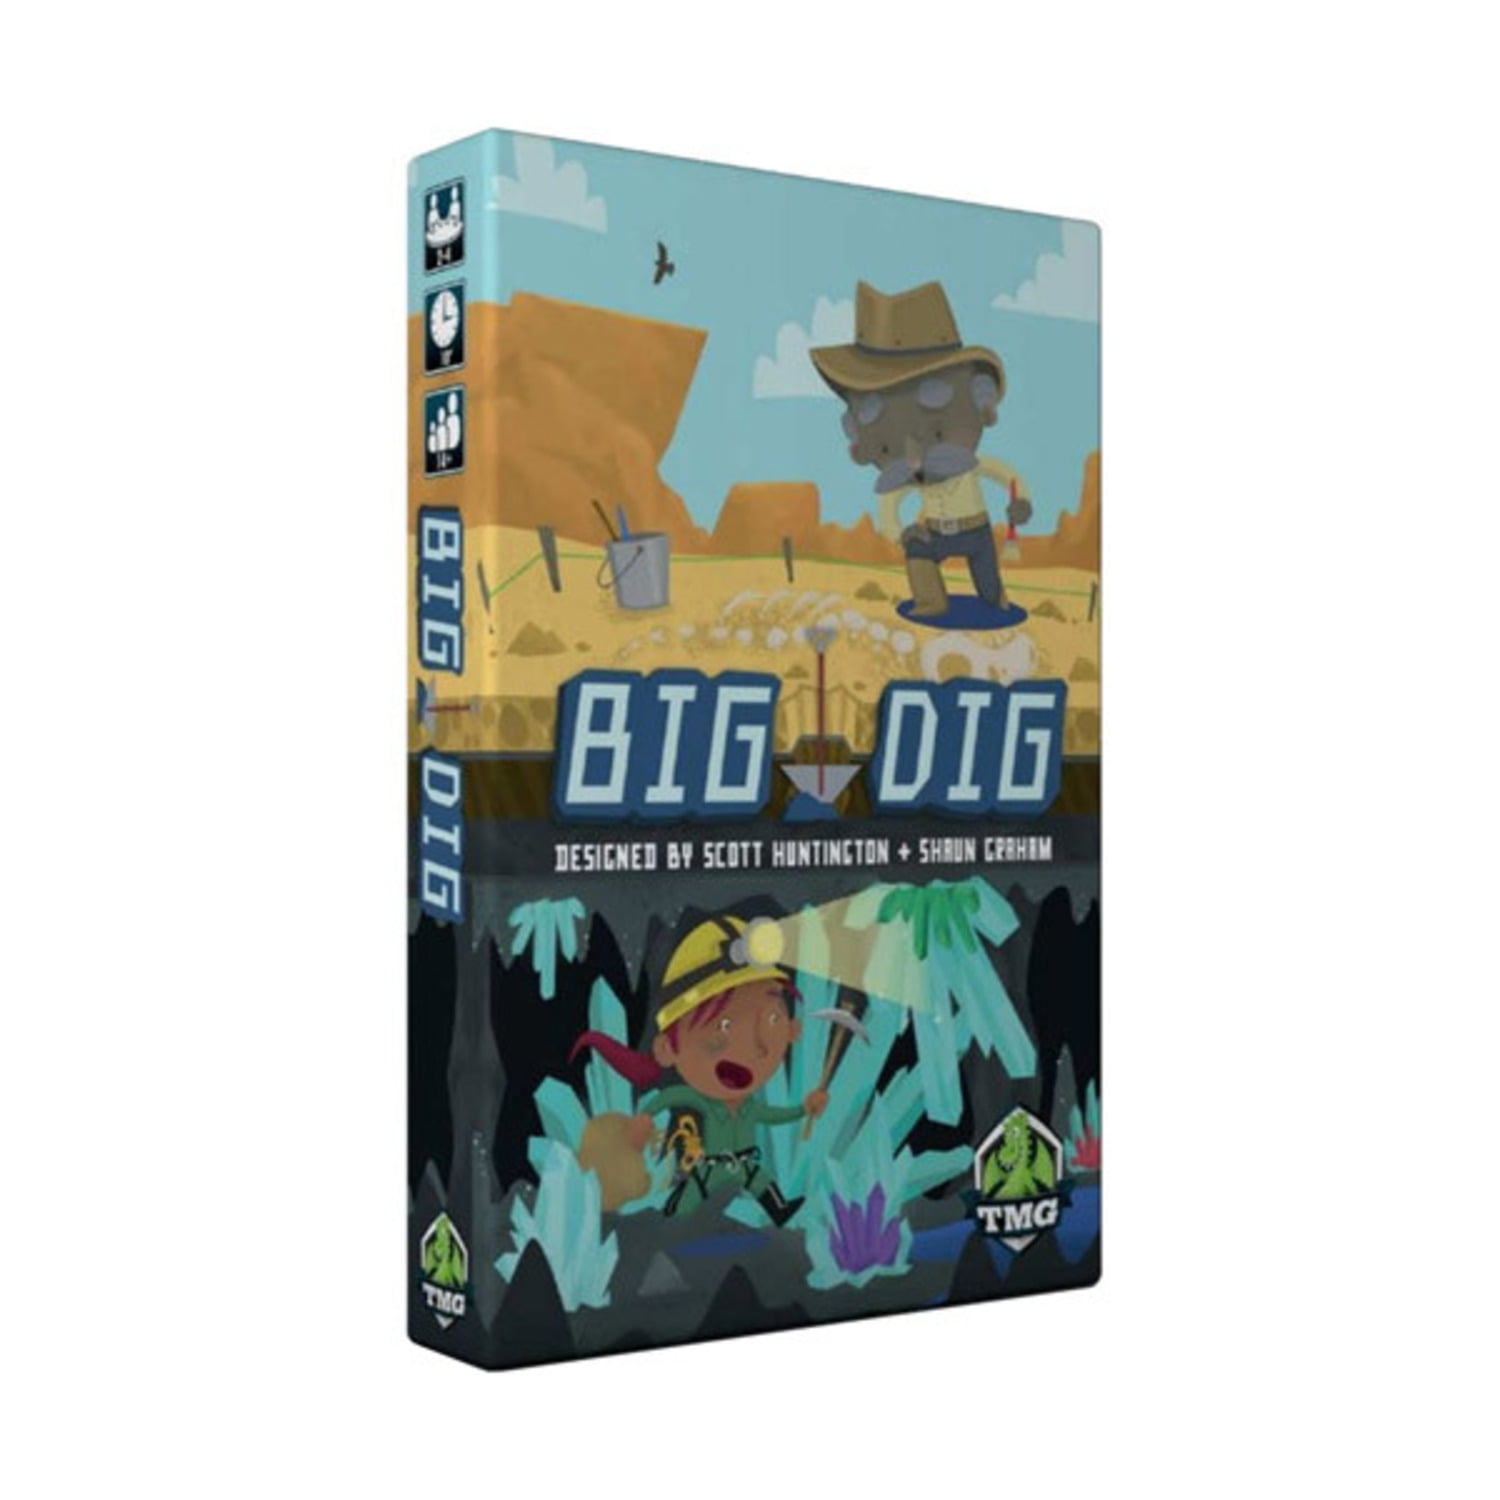 Ttt3023 Big Dig Game With 2-4 Players